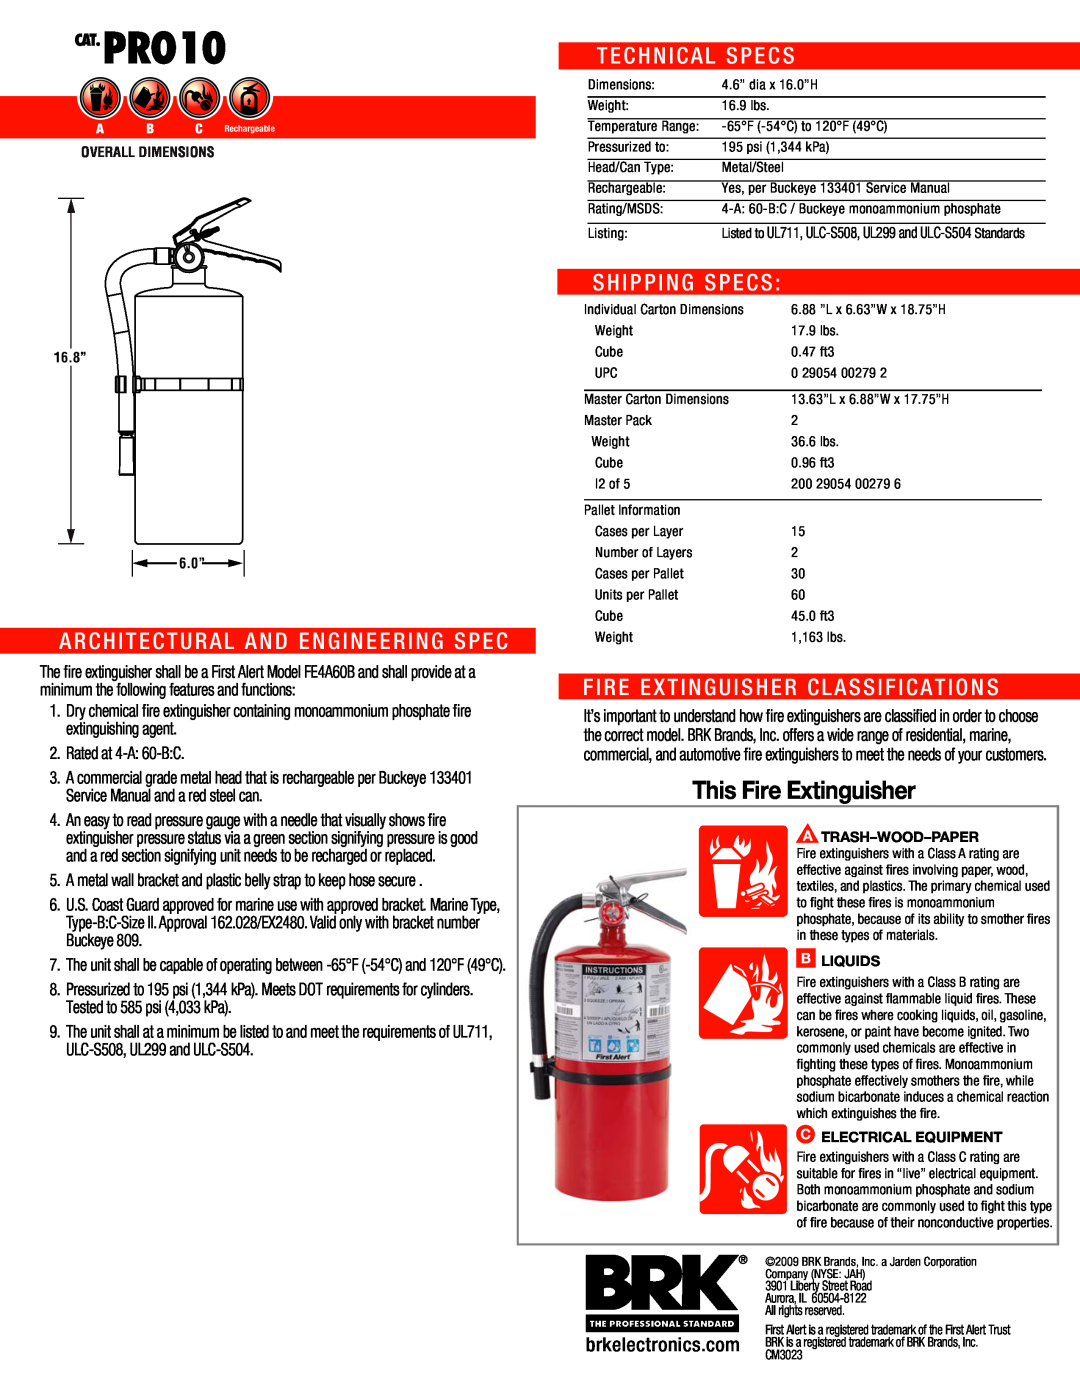 First Alert PRO10 Architectural And Engineering Spec, Technical Specs, Shipping Specs, Fire Extinguisher Classifications 